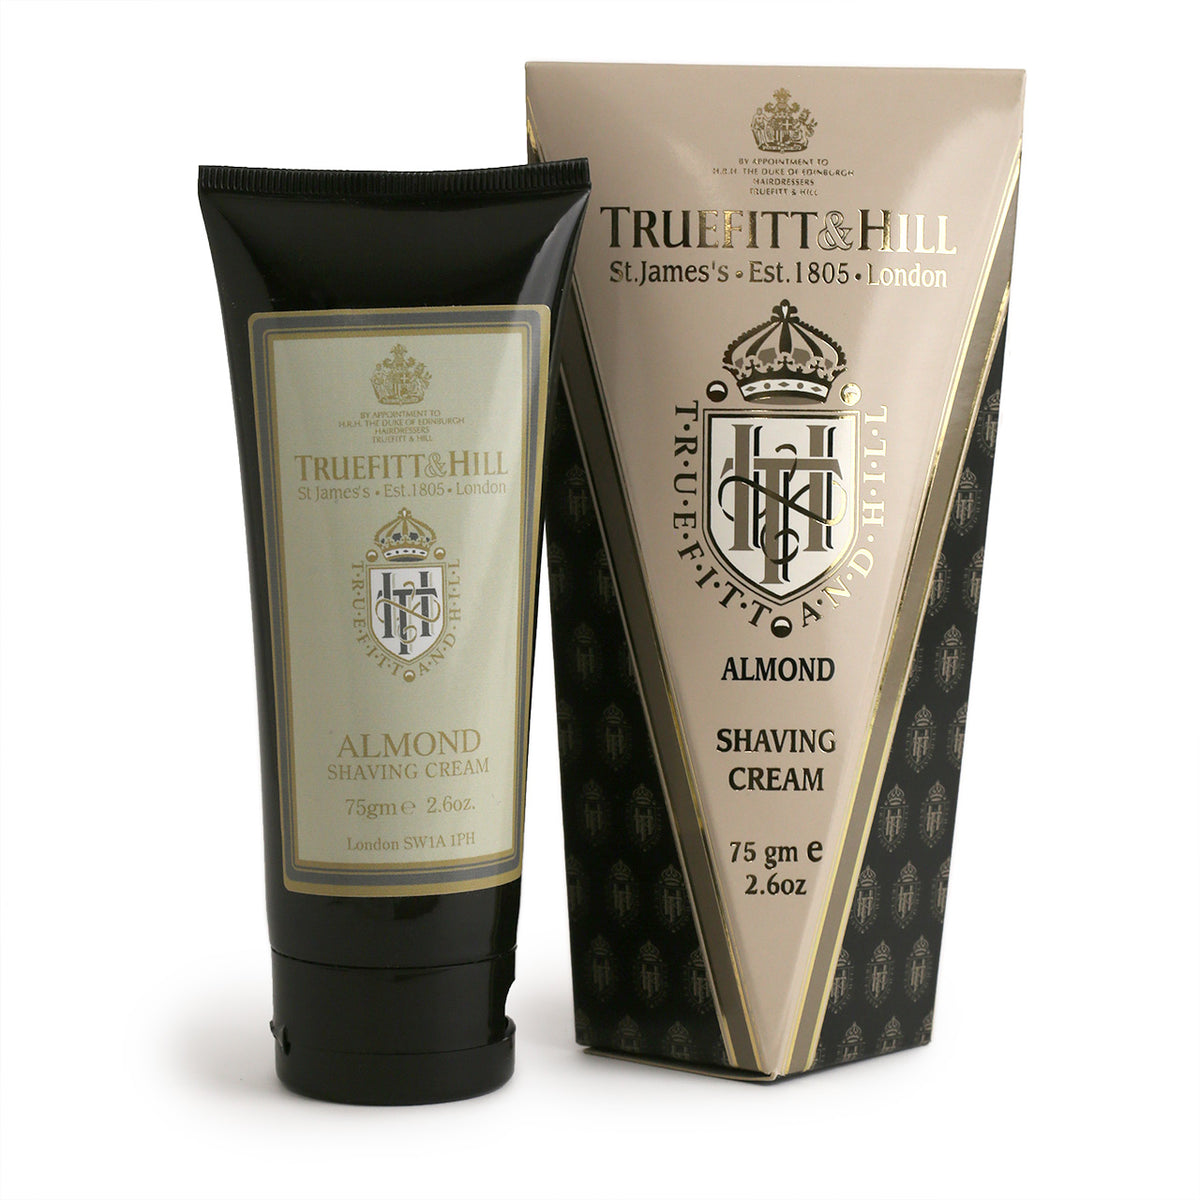 Truefitt &amp; Hill Almond shaving cream is a premium scent with cfreamy lather. Pictured  as black tube beside its irregular-shaped grey, gold and cream box